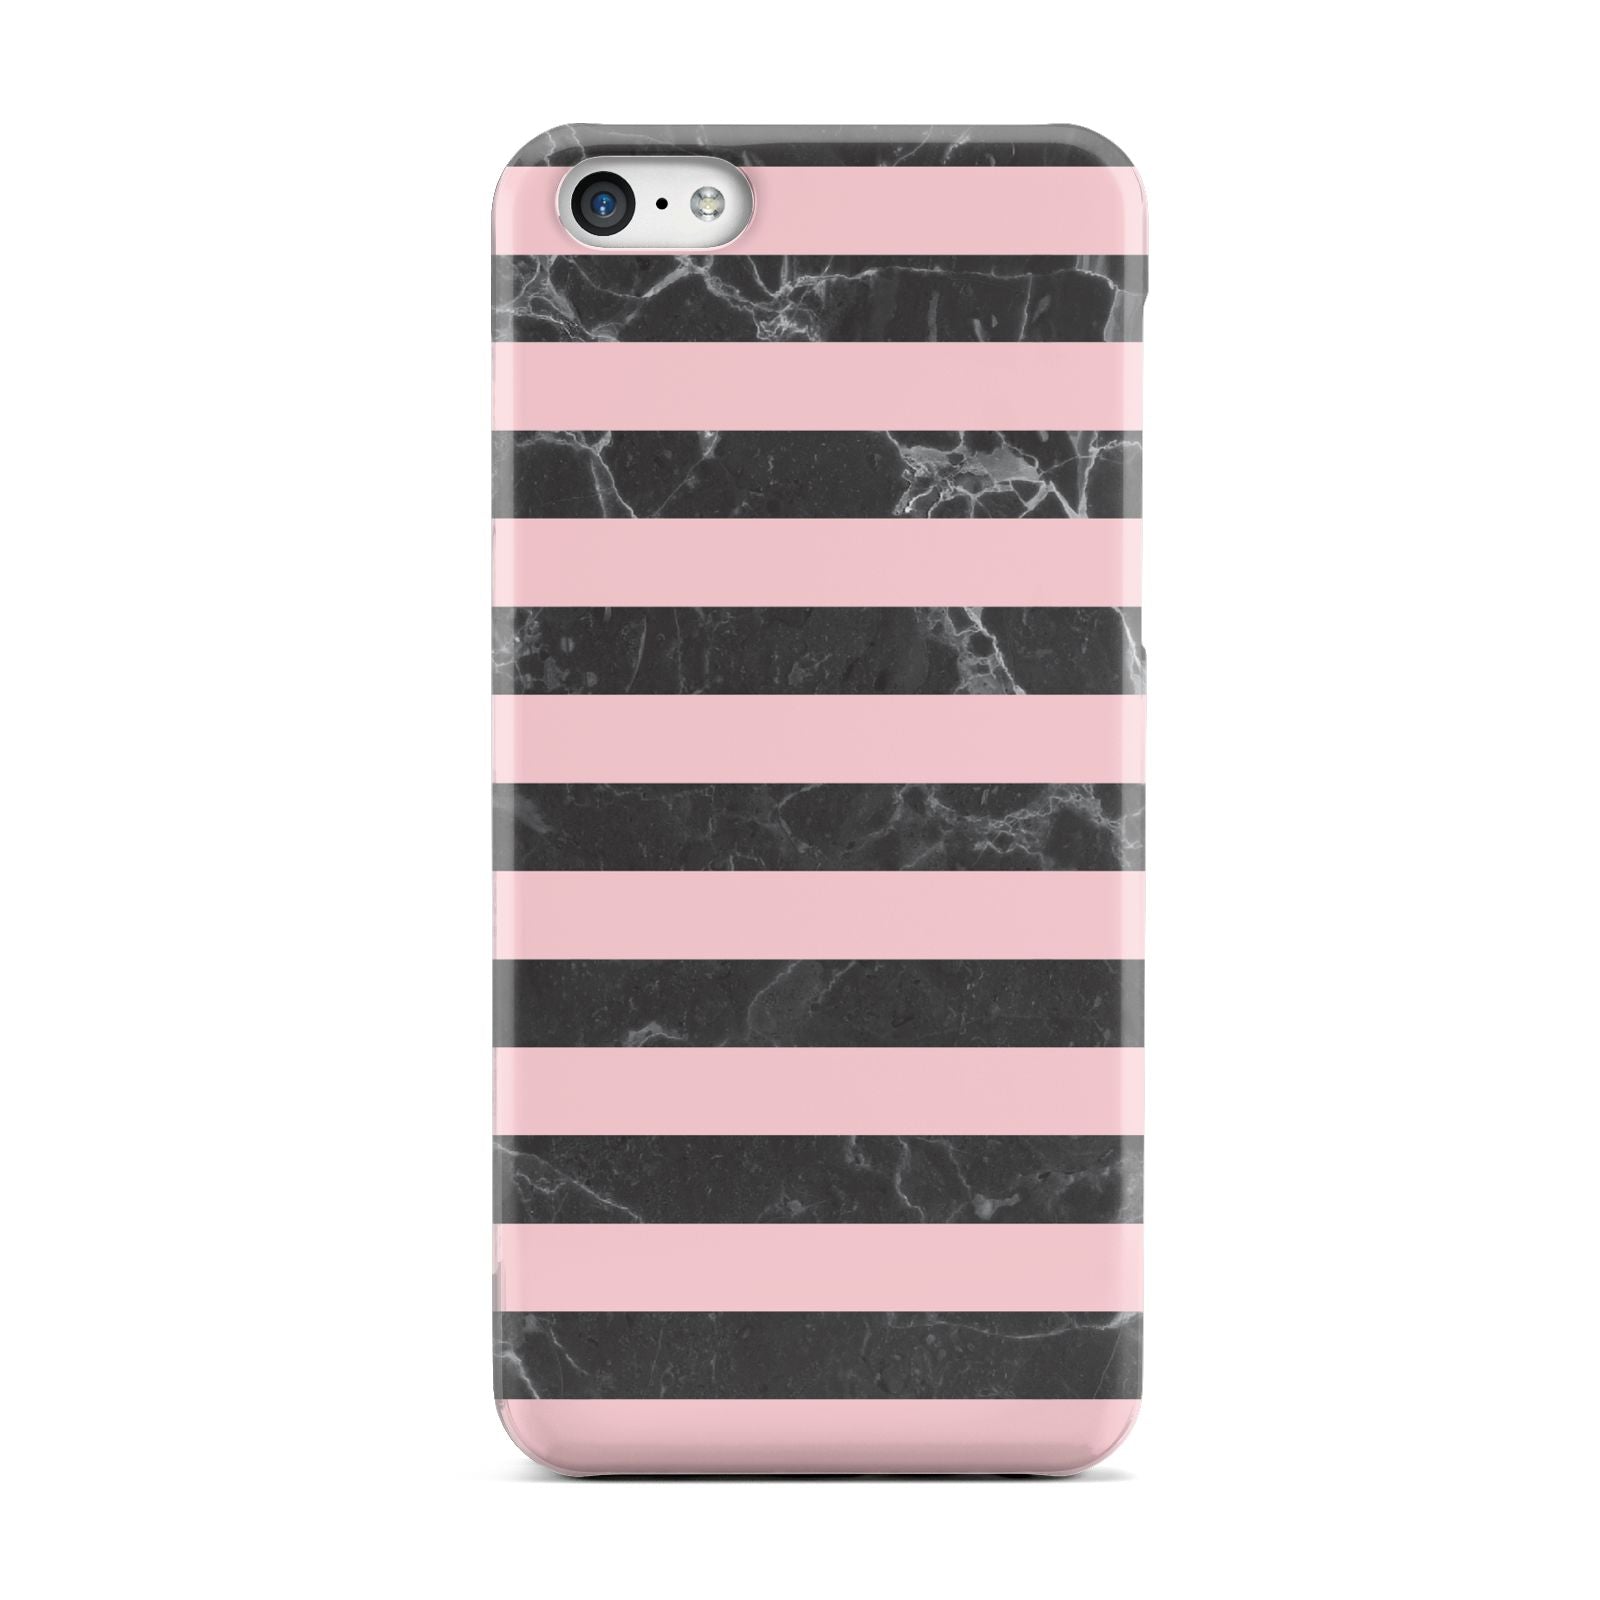 Marble Black Pink Striped Apple iPhone 5c Case